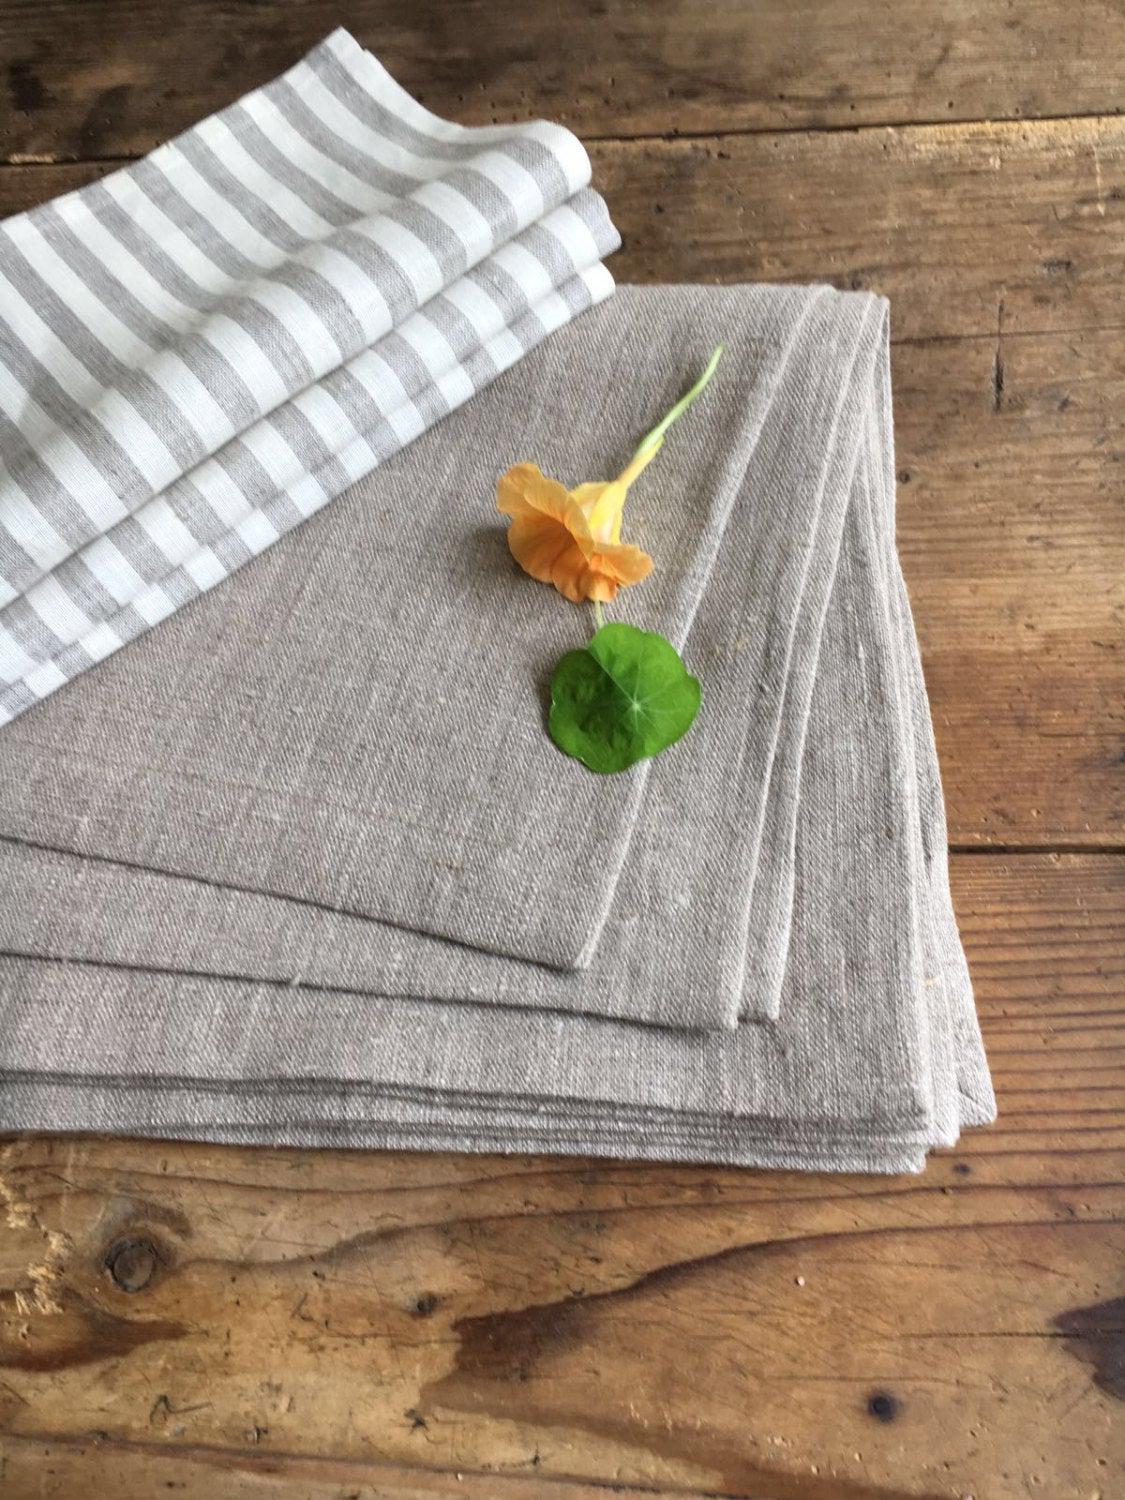 Grain Cotton Linen Blended Dining Table Cloth Napkins Placemats